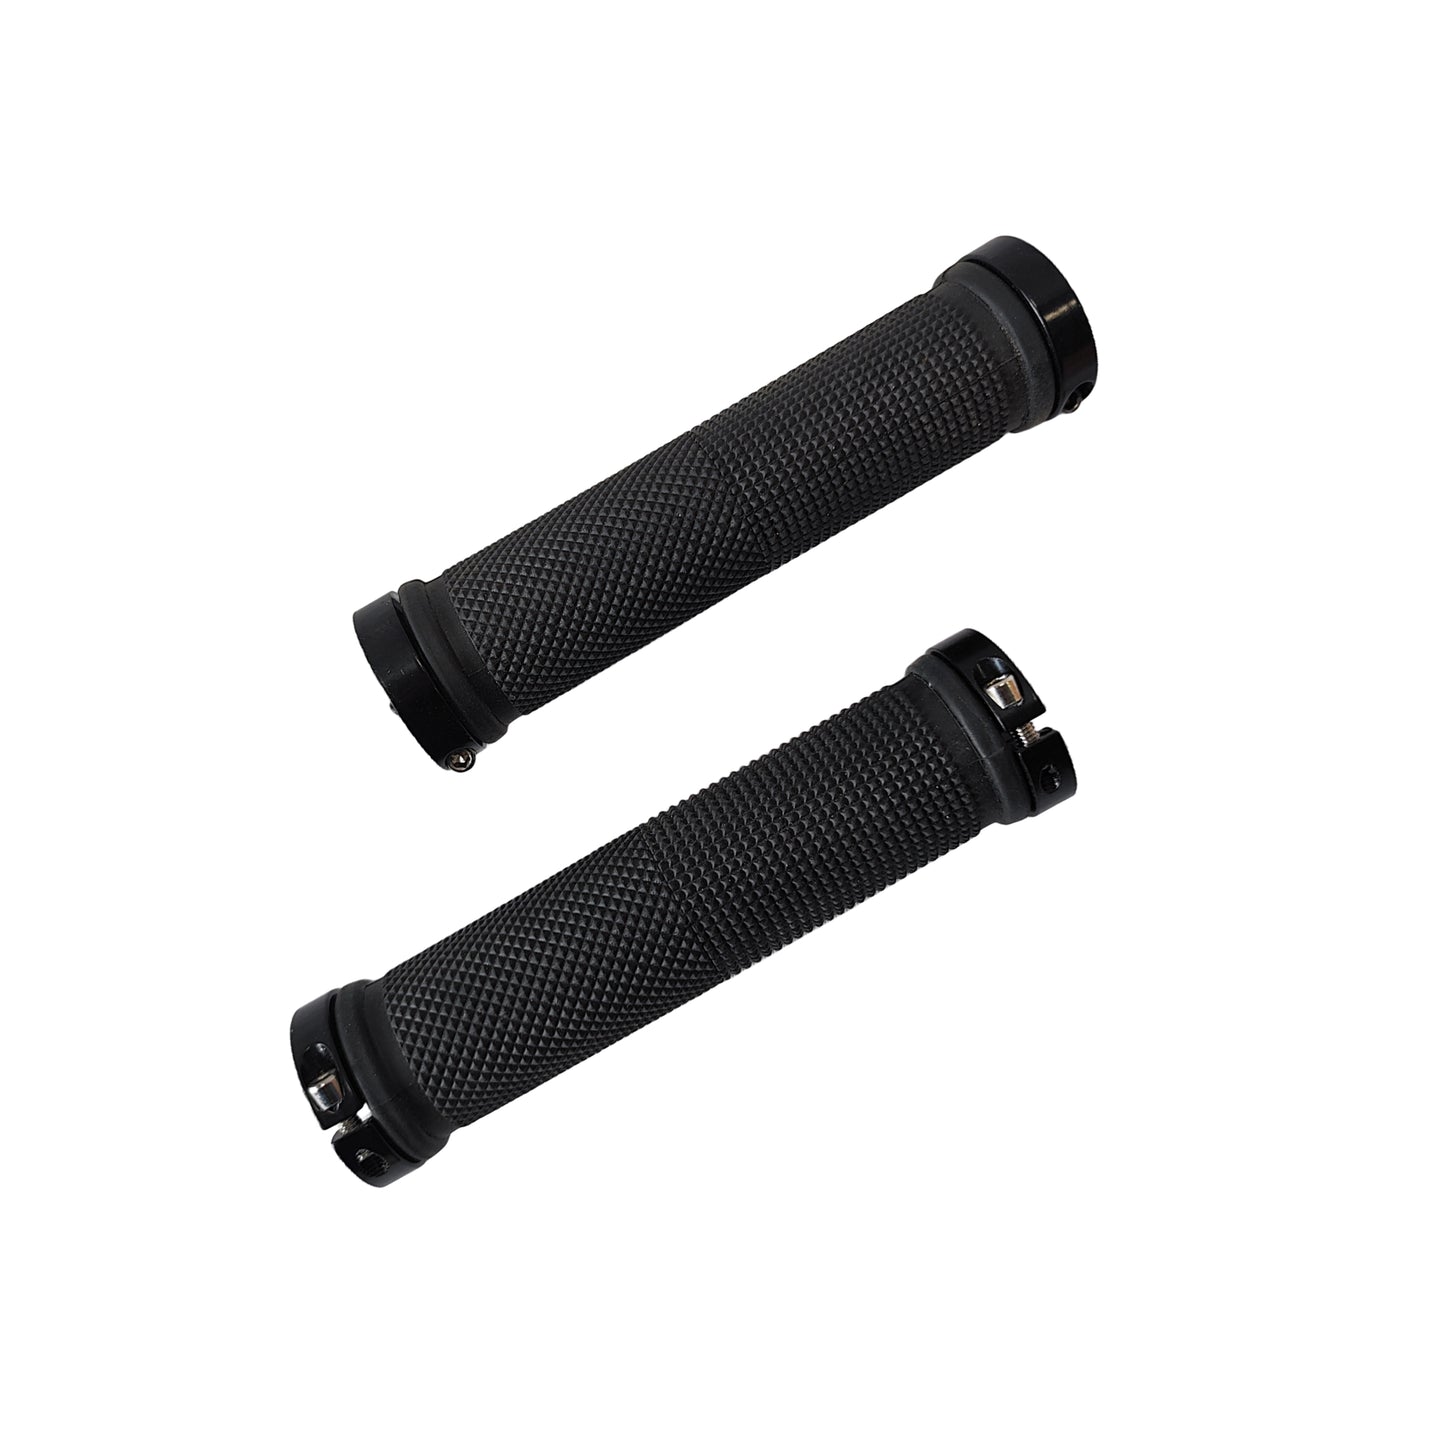 Lock-on Anti-Slip Bicycle Handlebar Handle Grip Black with double clamp